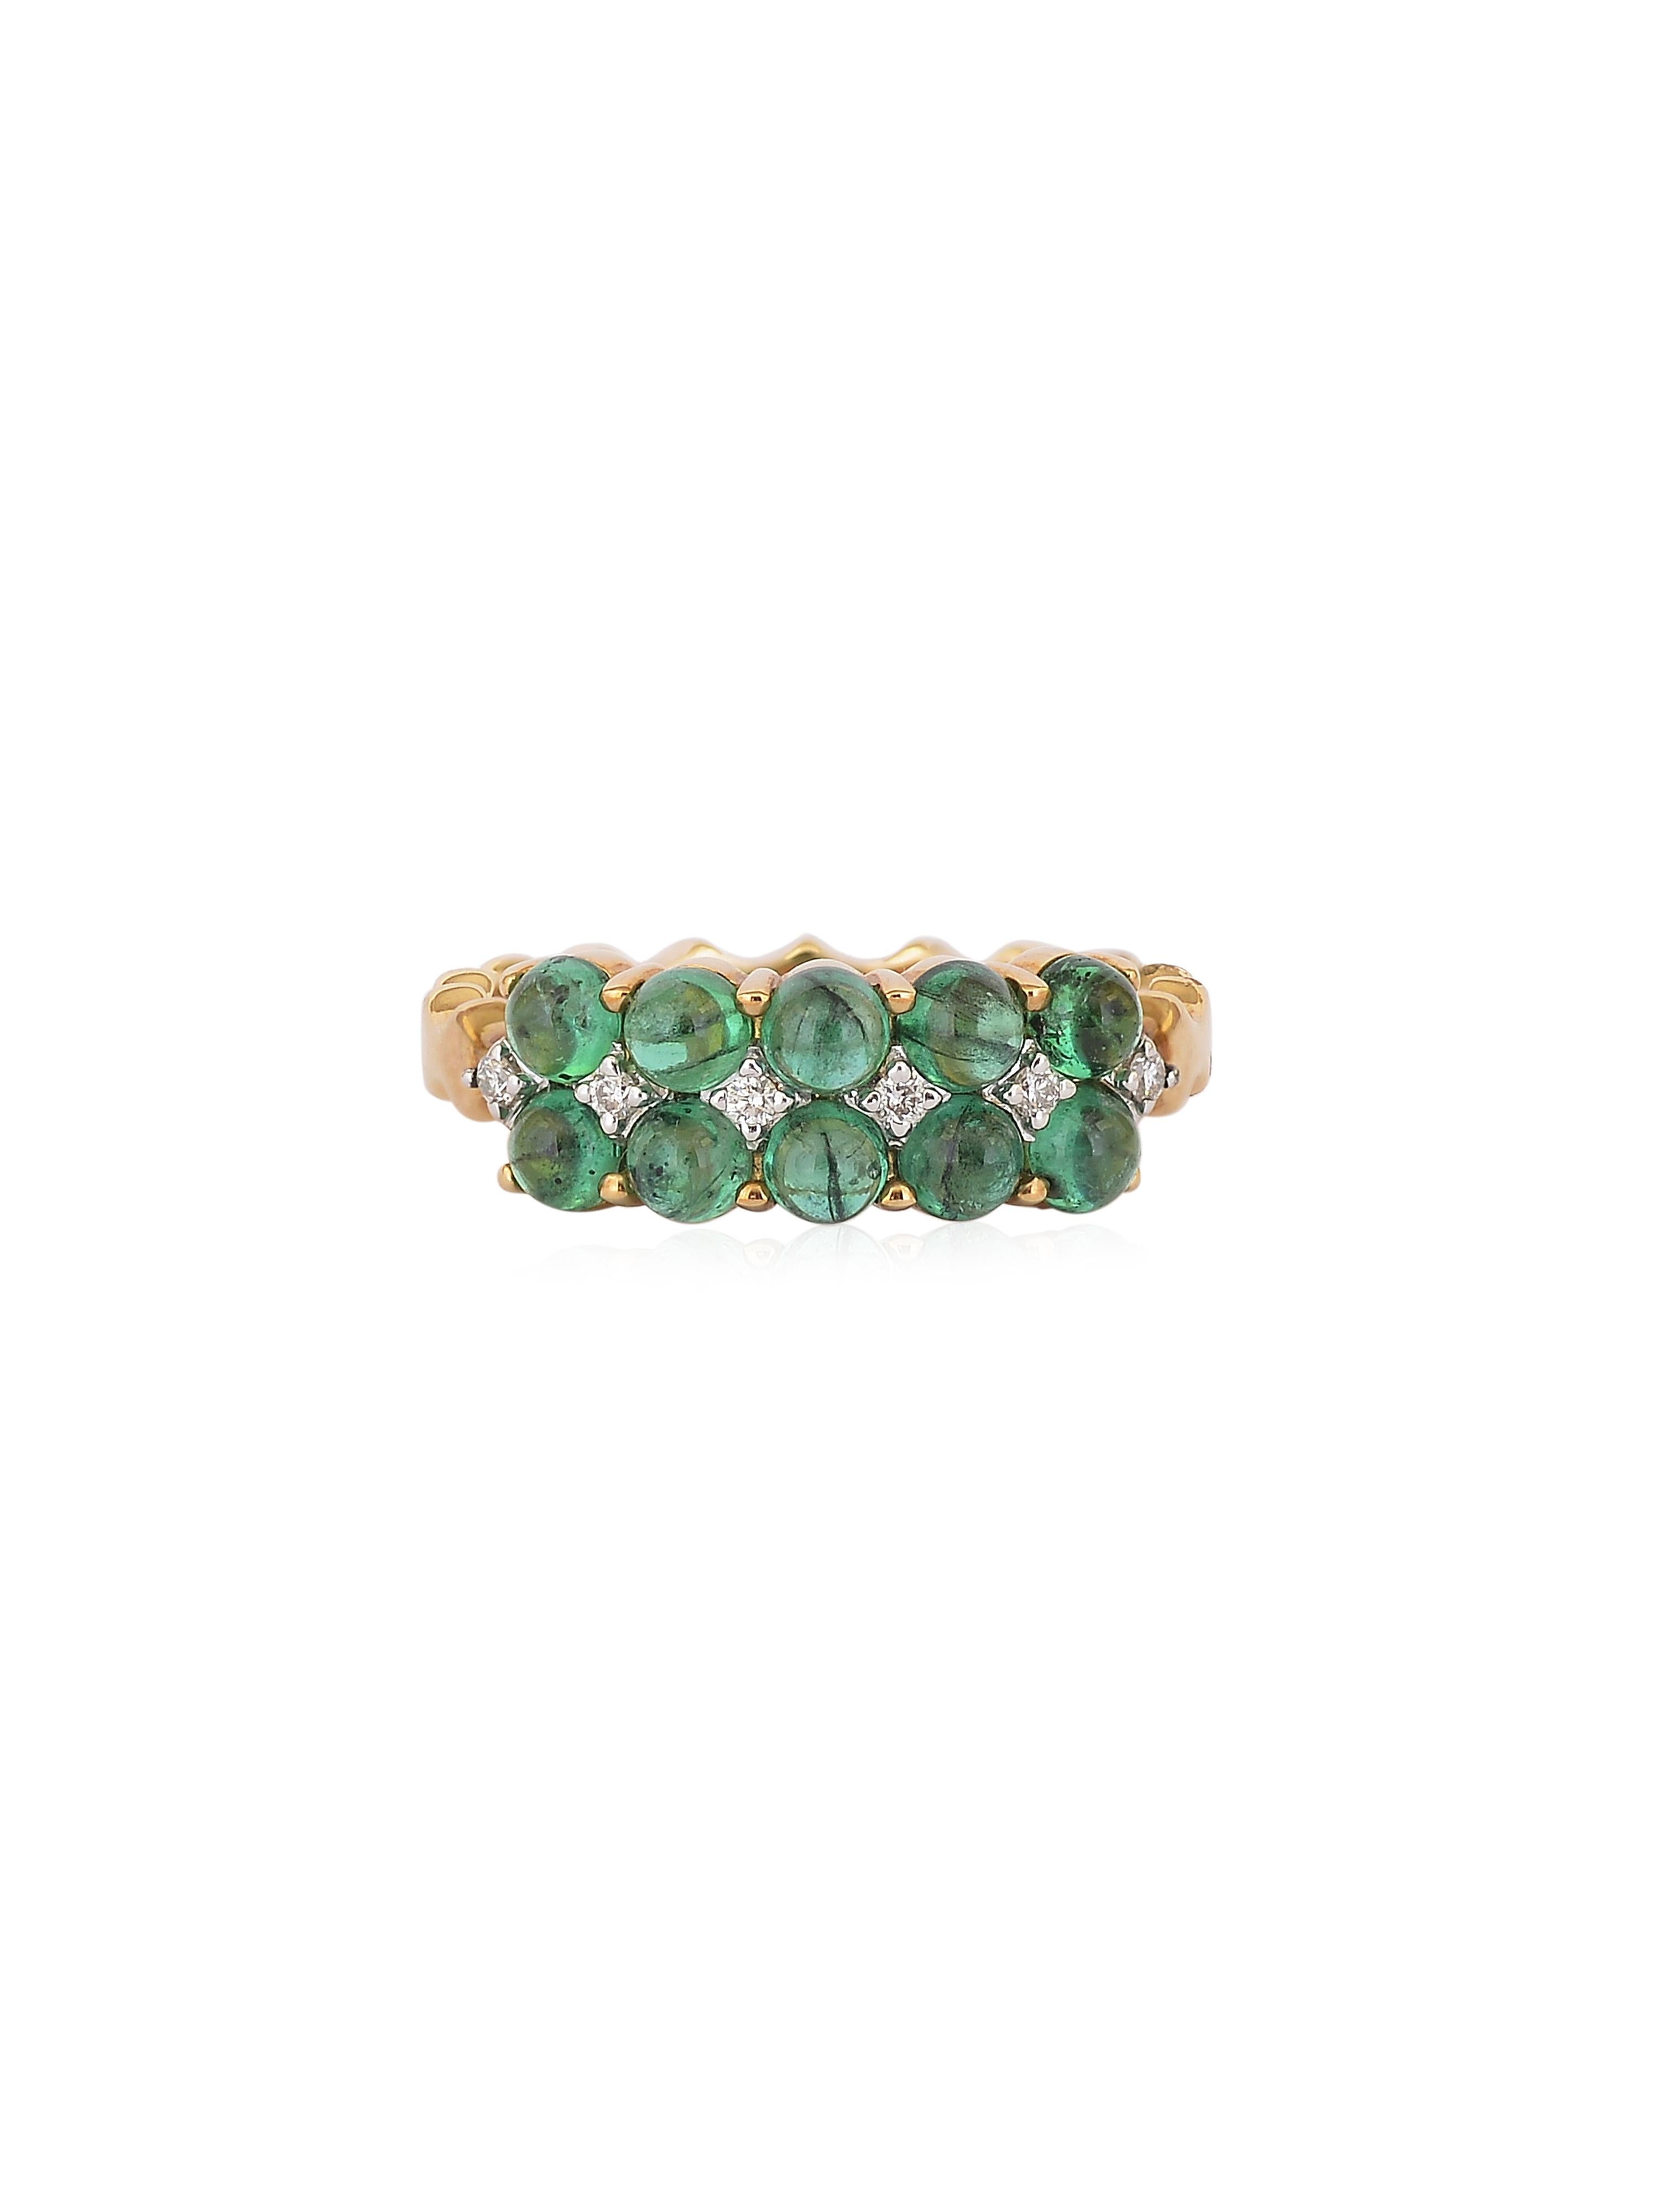 Emerald round Cabochon and diamond ring in 14K Gold  For Sale 2